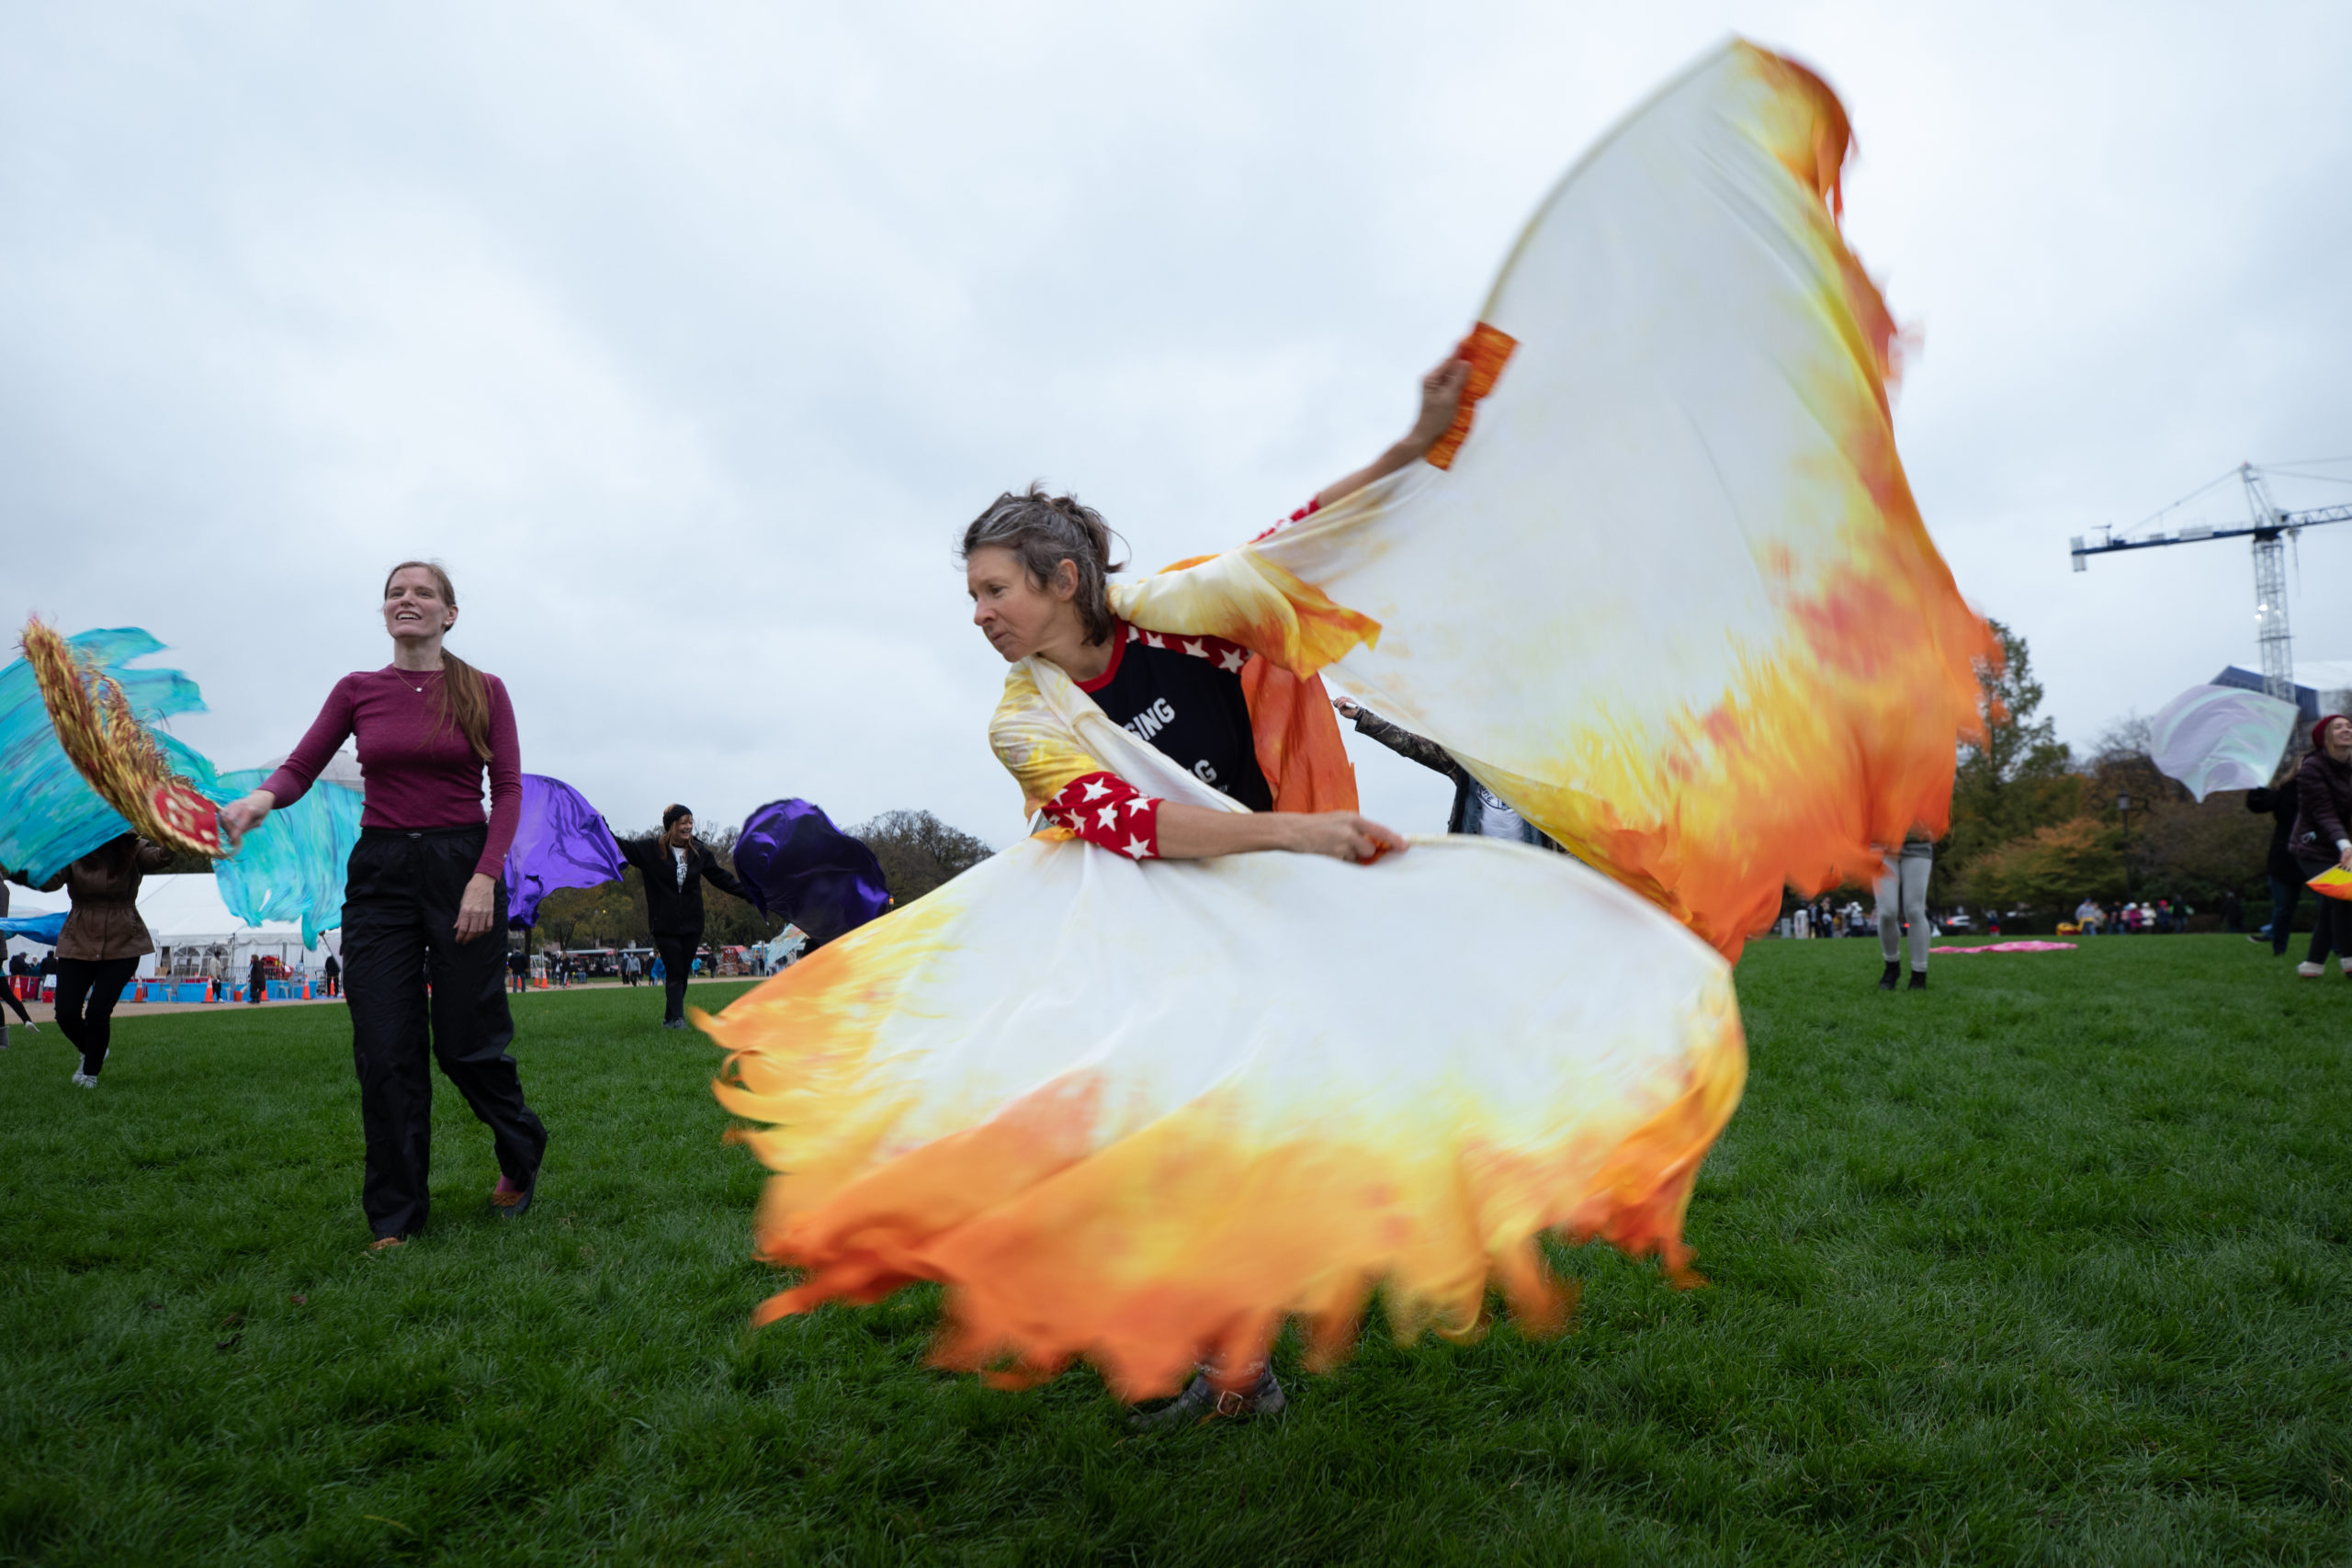 An attendee danced to worship music while holding fabric sheets resembling fire at the "Let Us Worship" protest in Washington, D.C. on October 25, 2020. (Kaylee Greenlee - DCNF)